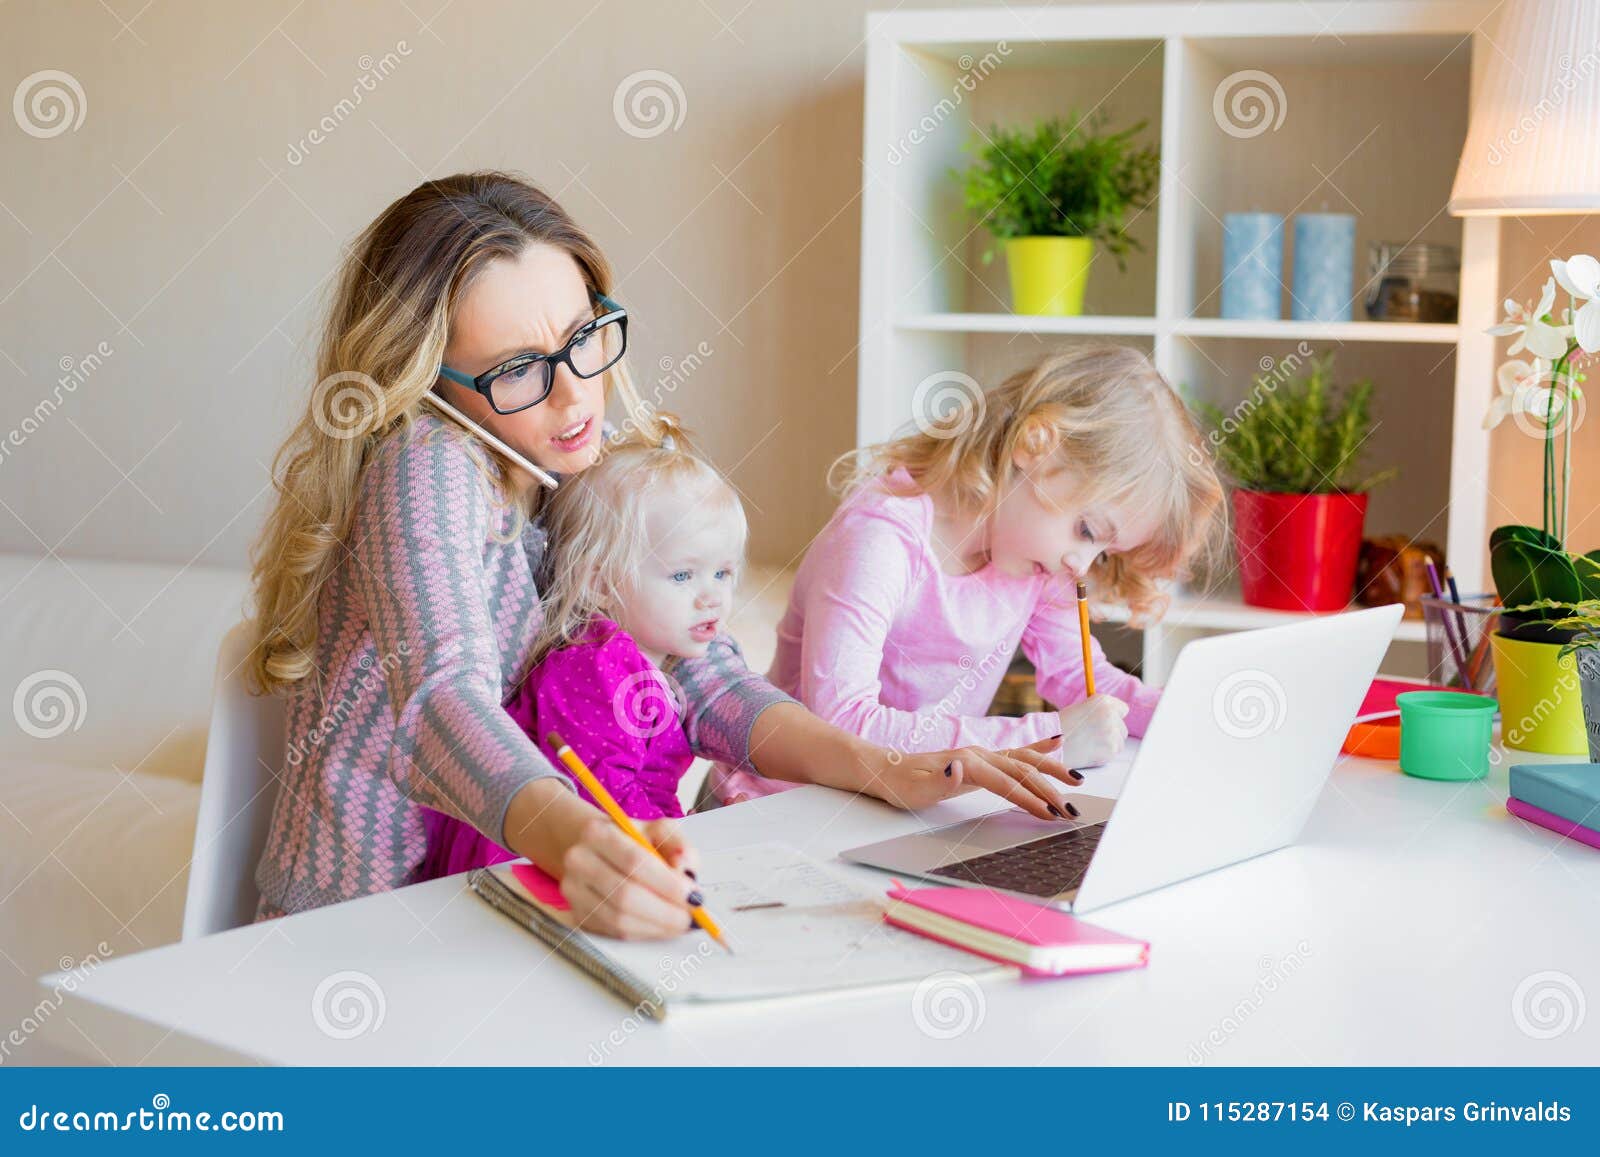 busy woman trying to work while babysitting two kids